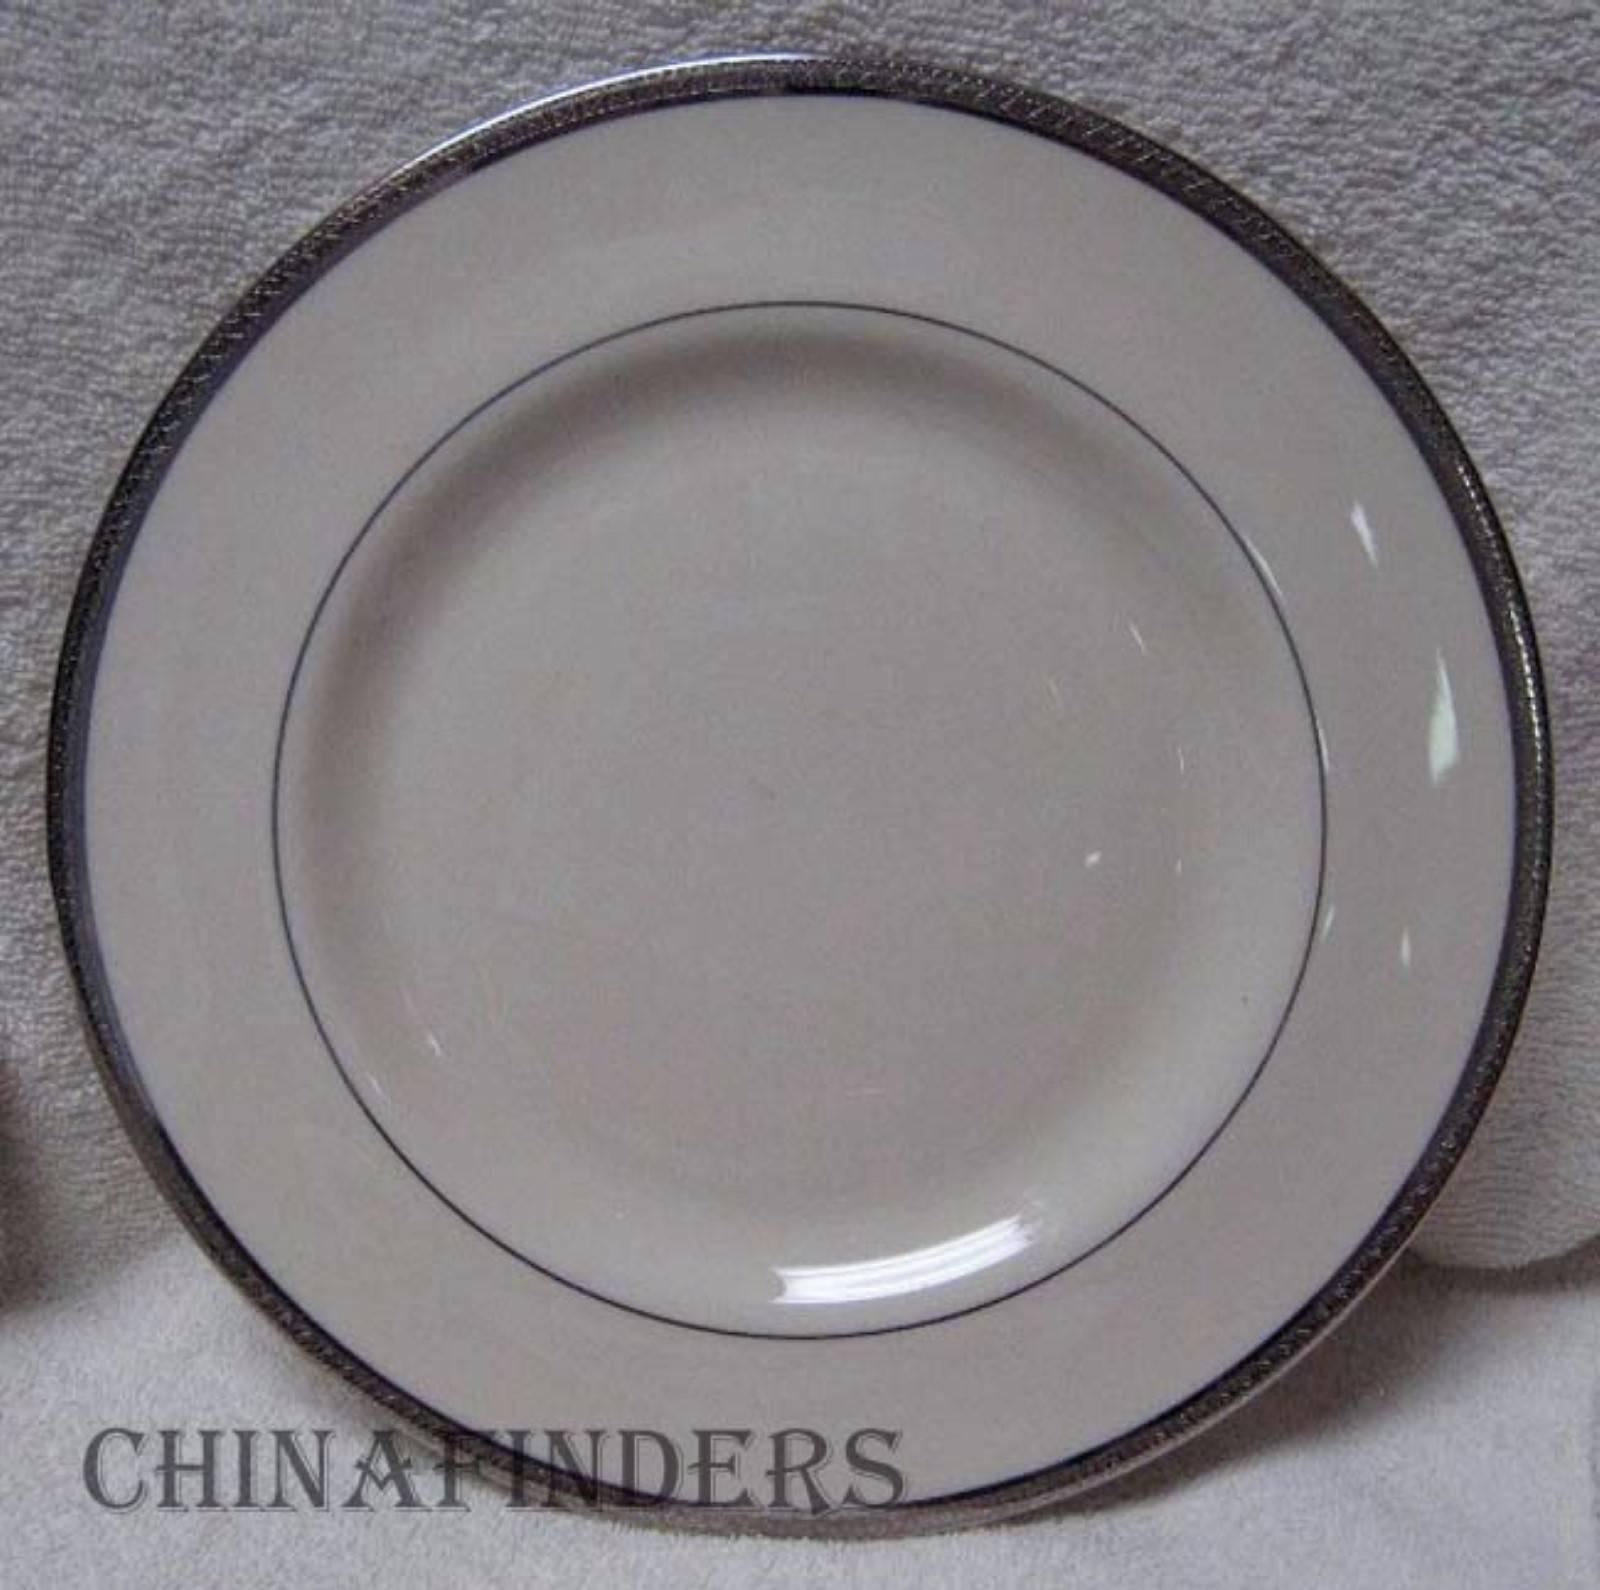 Haviland New York china Shelton pattern set of 12 dinner plates

in great condition free from chips, cracks, break or stain and show minimal wear.

Measures approx 10-5/8